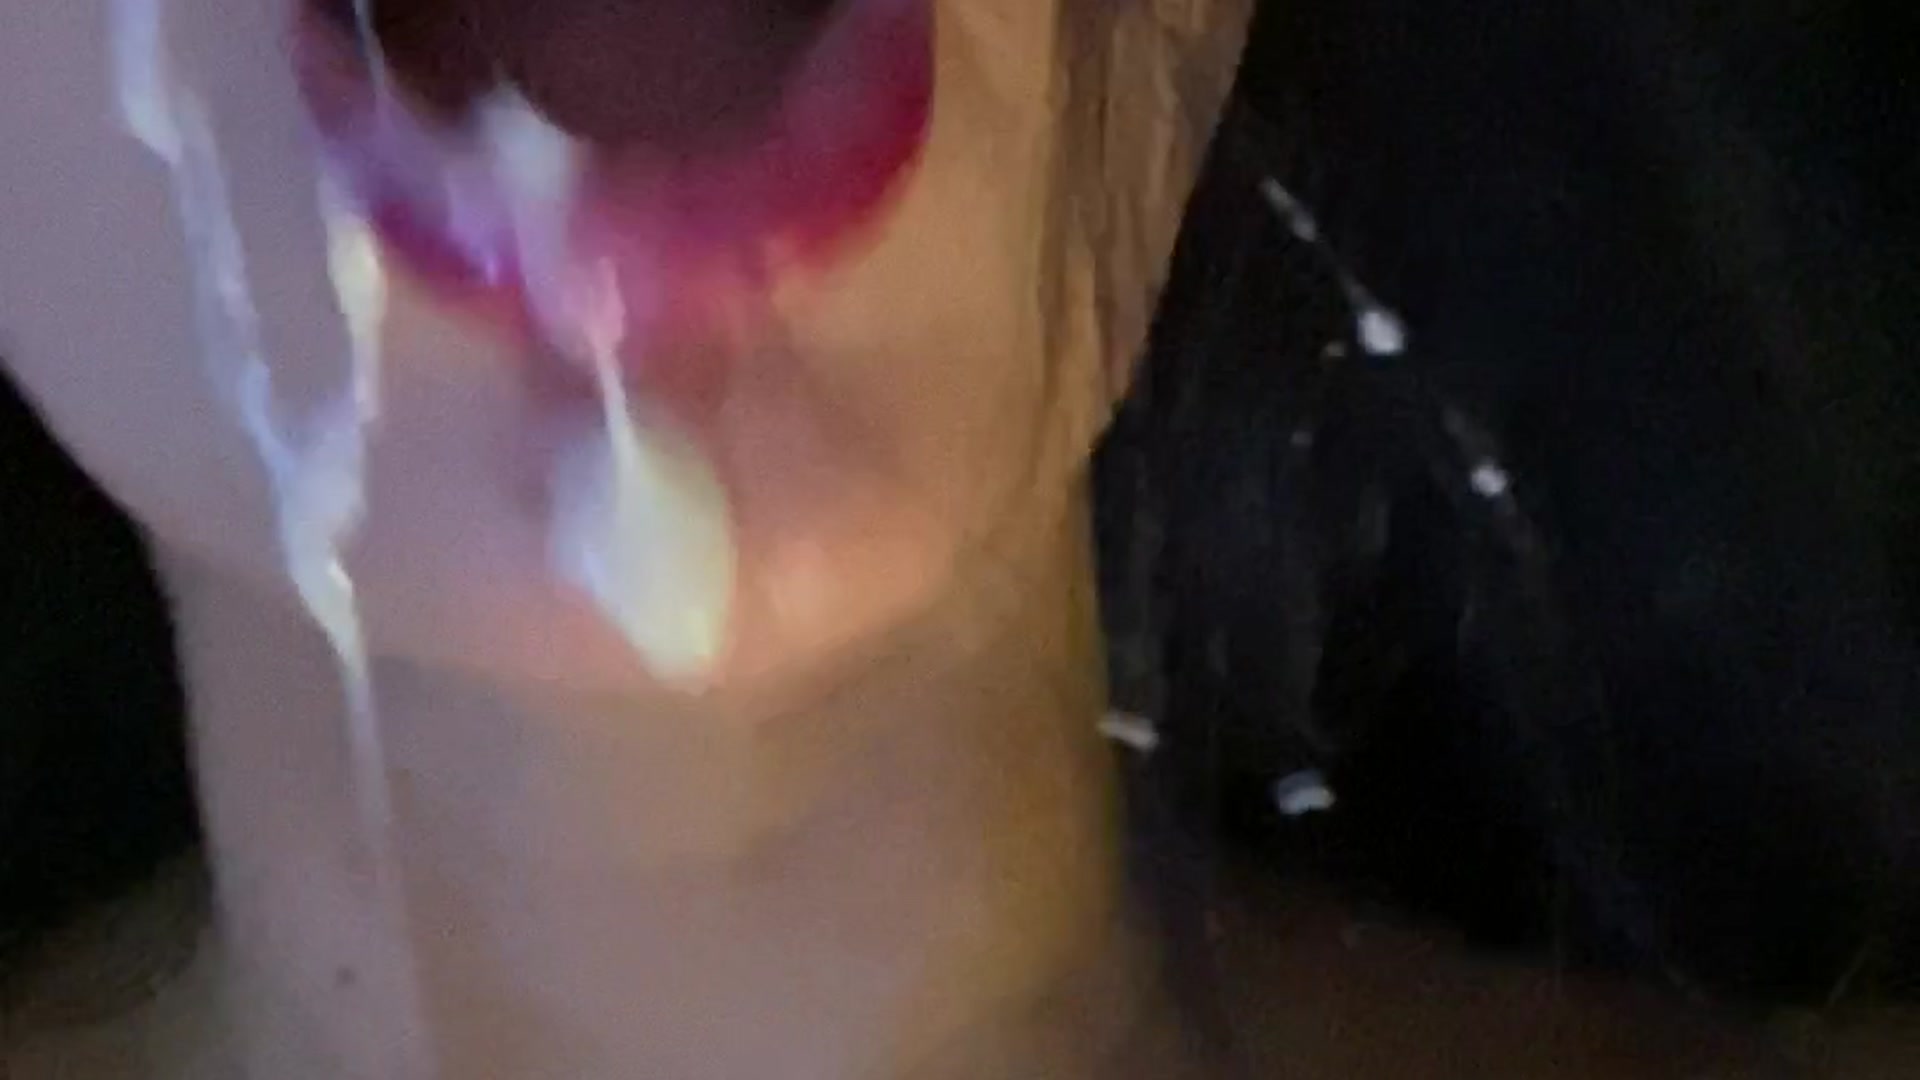 What a delicious fake cum on my face